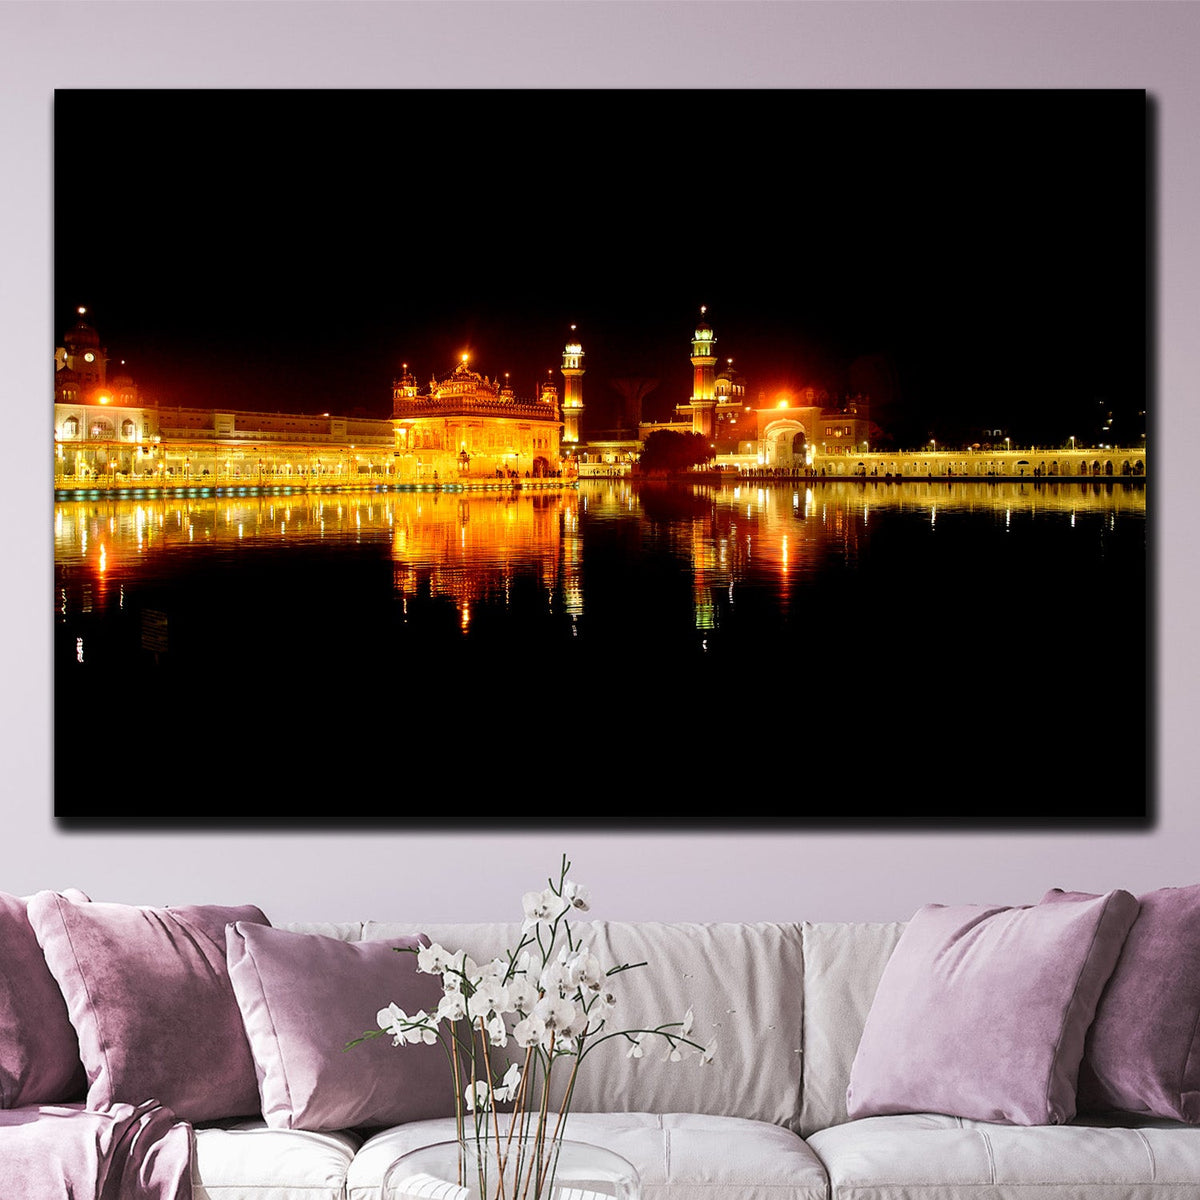 https://cdn.shopify.com/s/files/1/0387/9986/8044/products/TheIconicGoldenTempleCanvasArtprintStretched-4.jpg